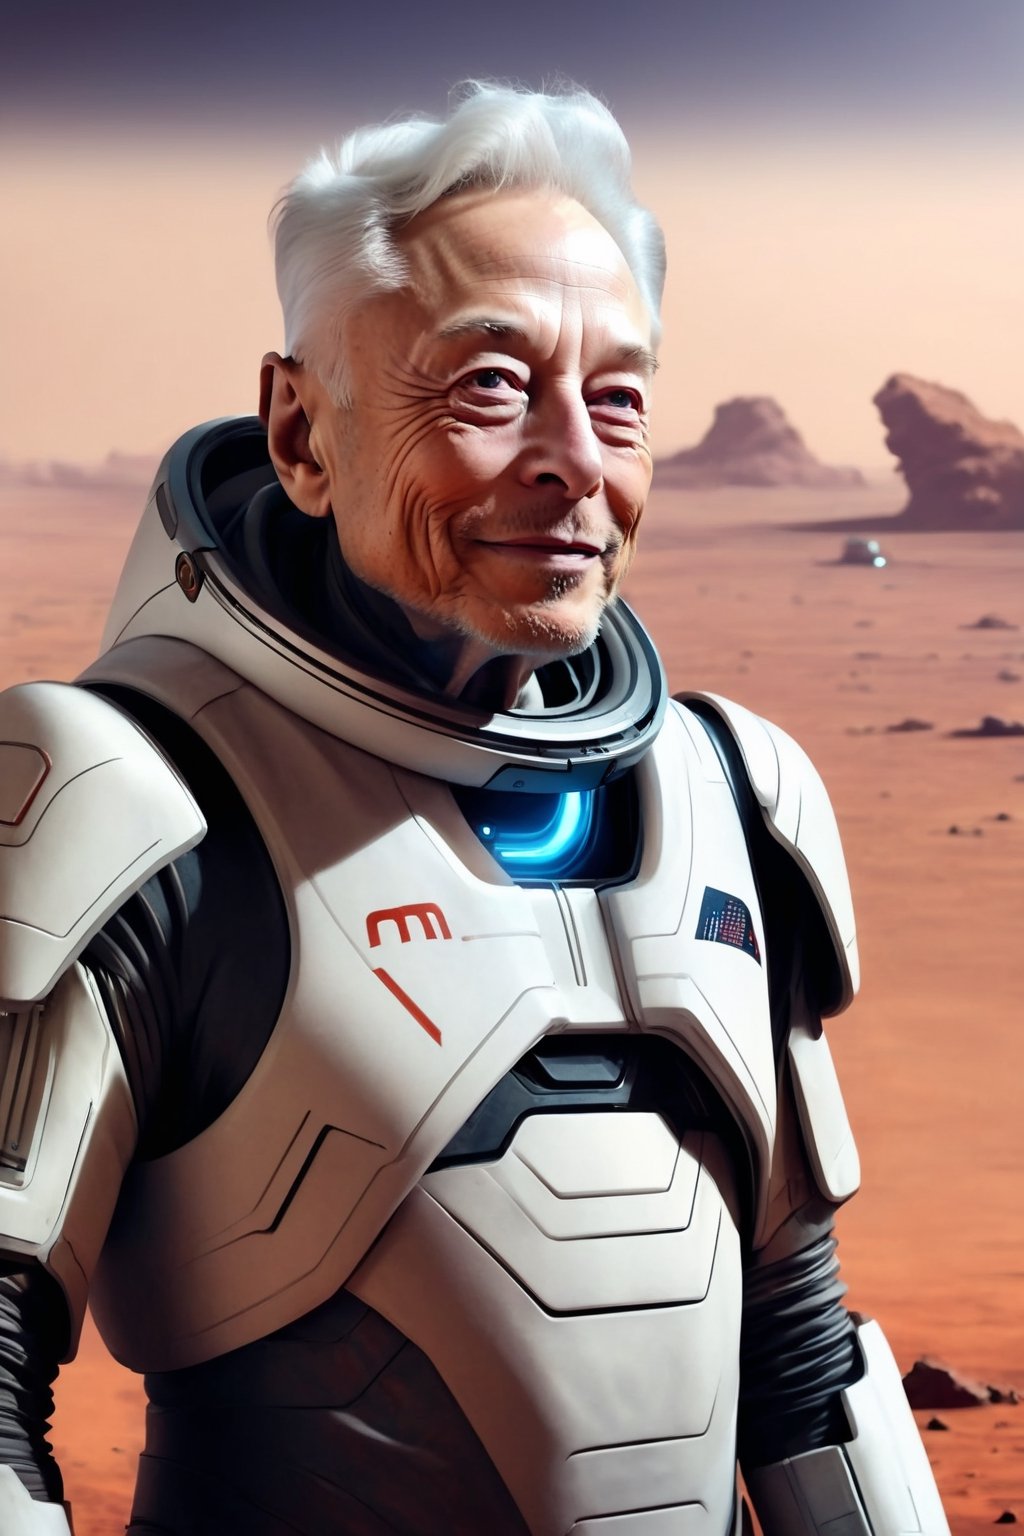 mj, cozy, cinematic, very old Elon Musk, 99 years old, male extremely wrinkled, white sparse hair,  mischevious smile, on Mars surface, space suit, masterpiece, cyberpunk style